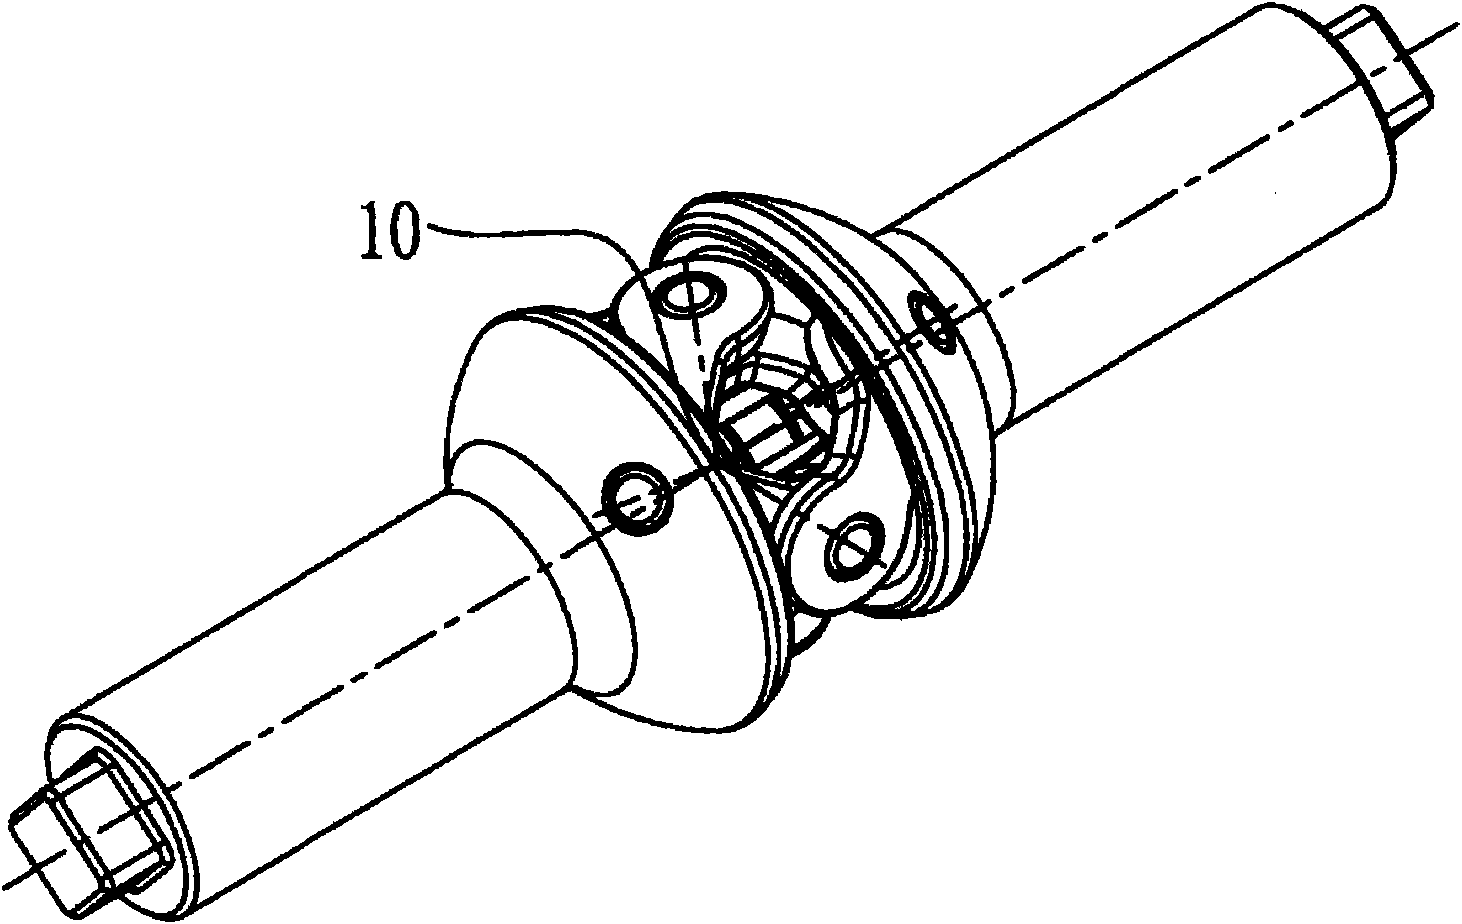 Constant-speed universal coupling